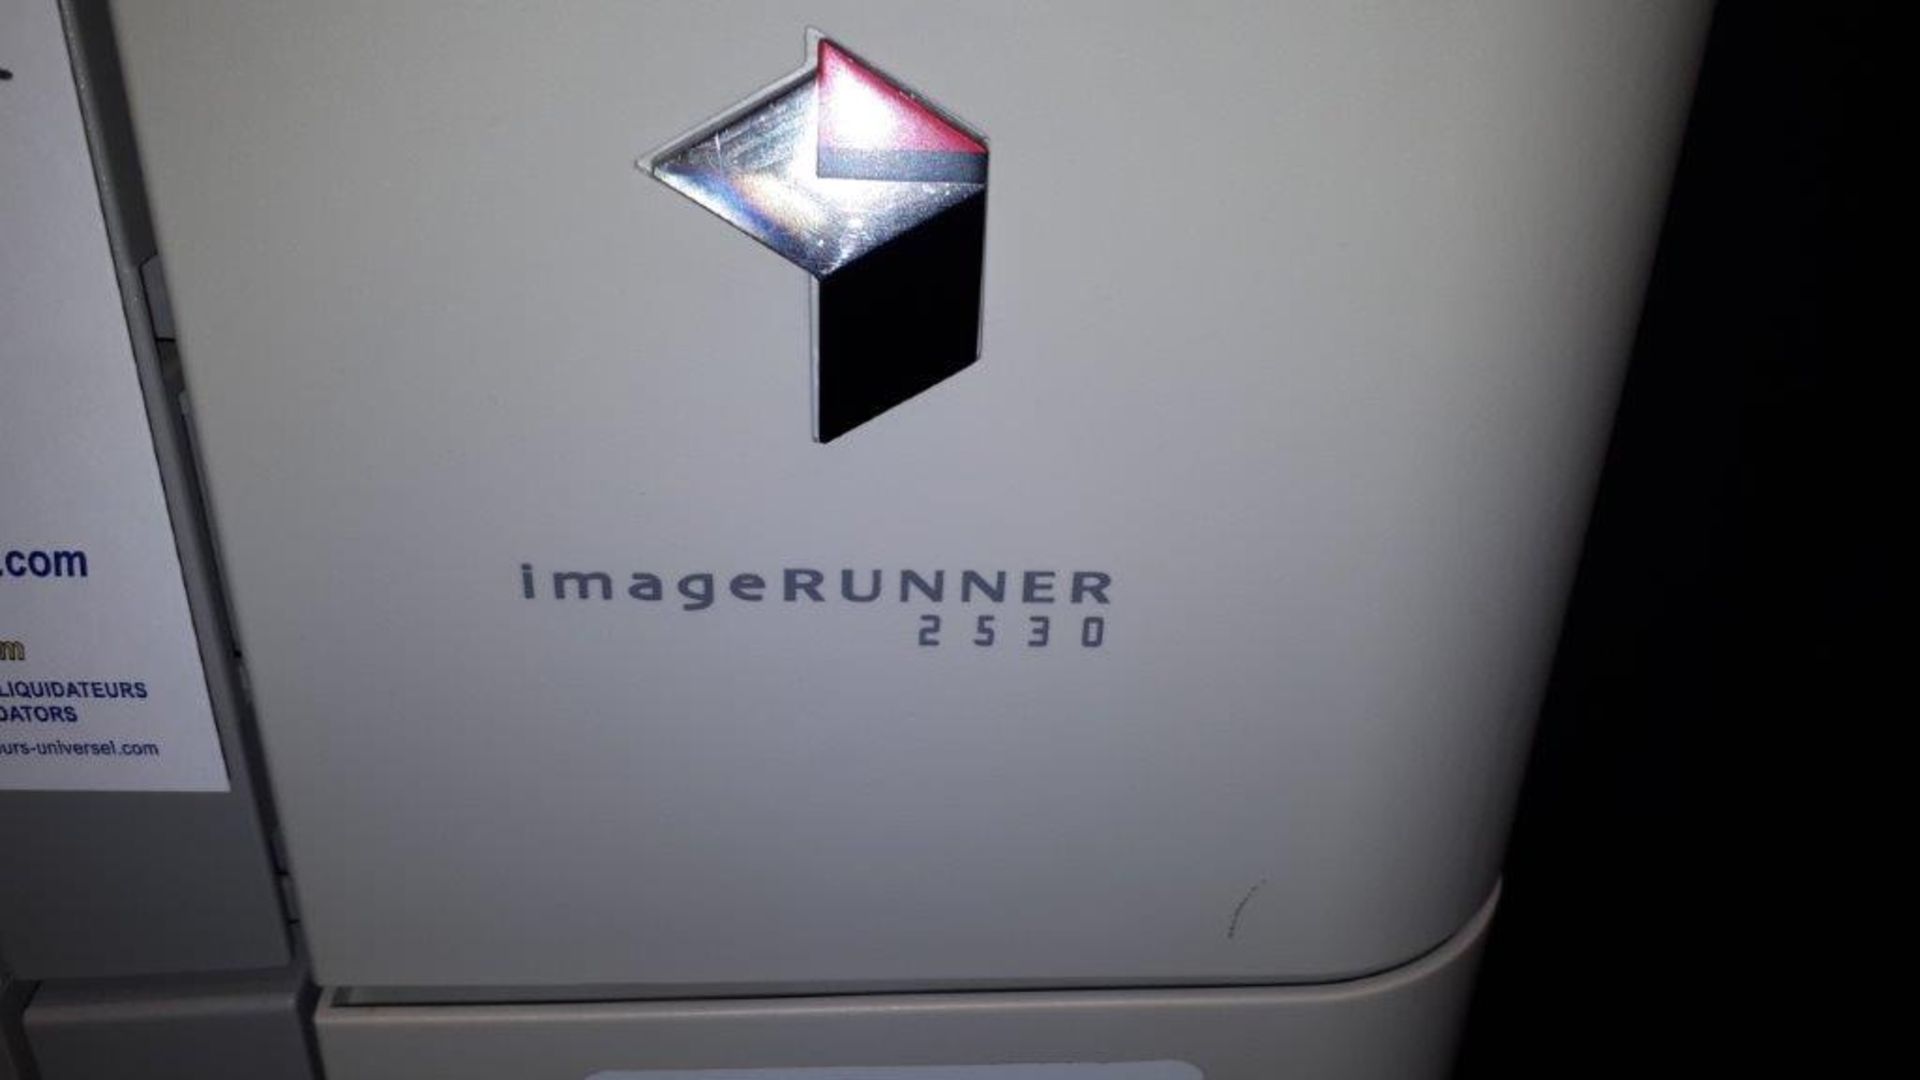 Canon Imagerunner 2530 photocopier - Image 5 of 5